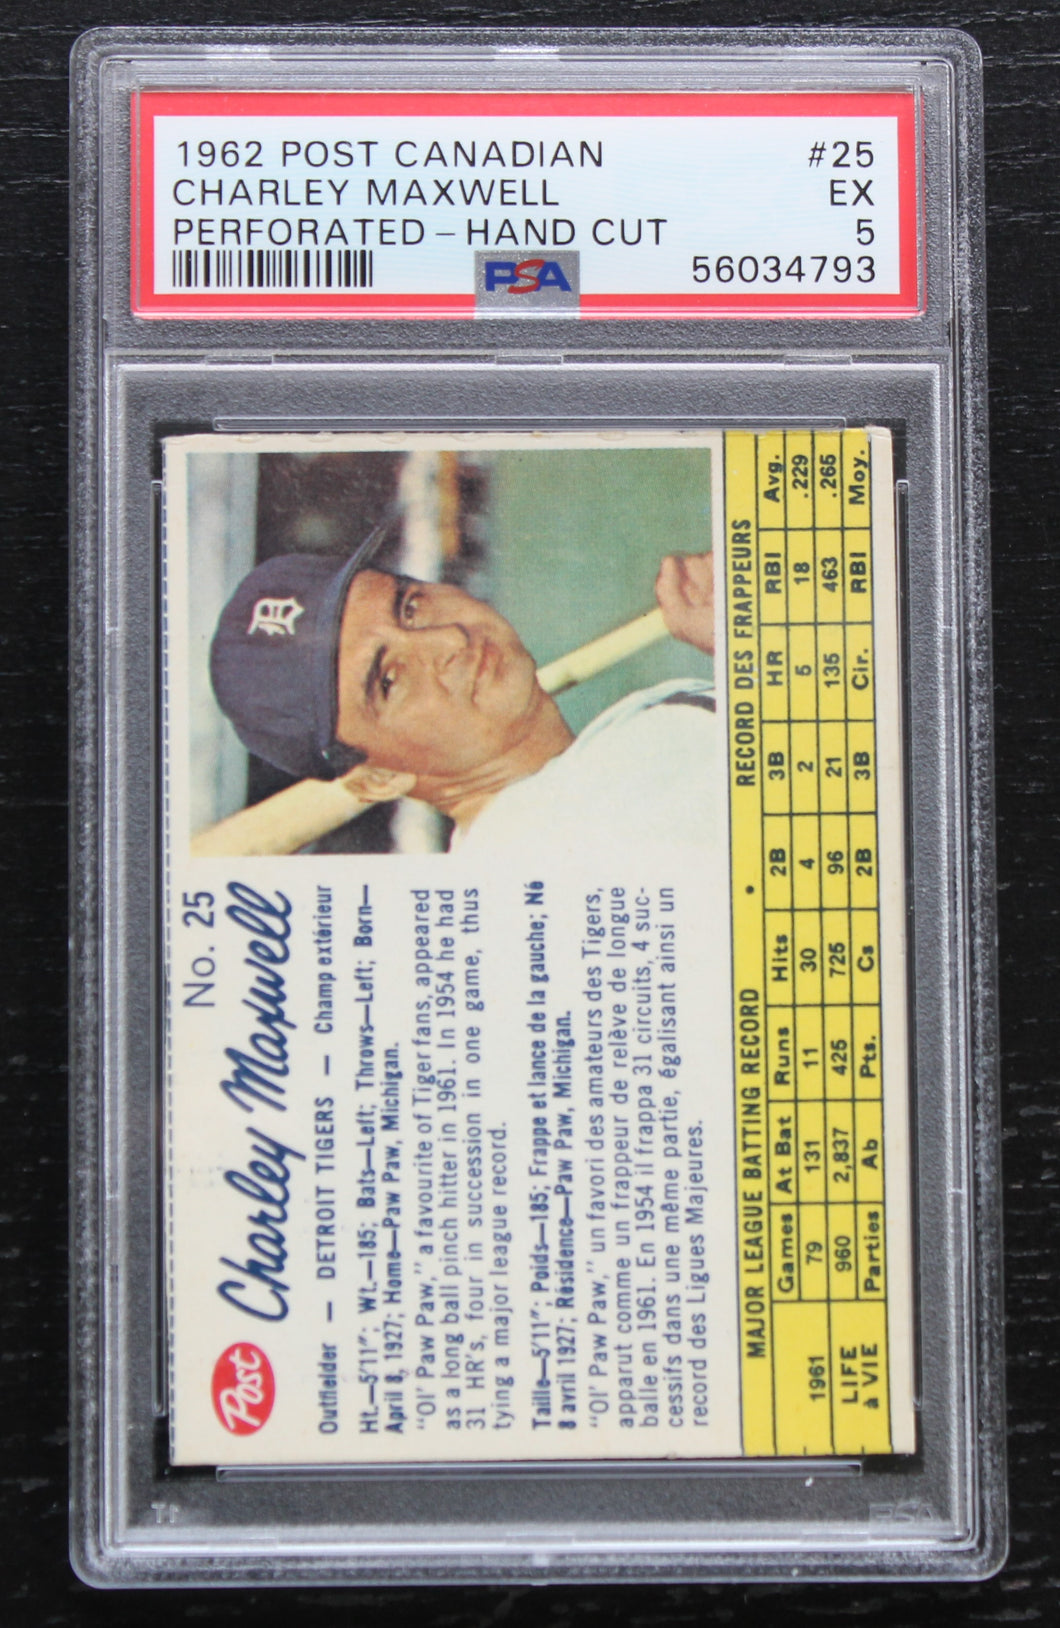 1962 Post Canadian Charley Maxwell Perforated - Hand Cut #25 PSA EX 5